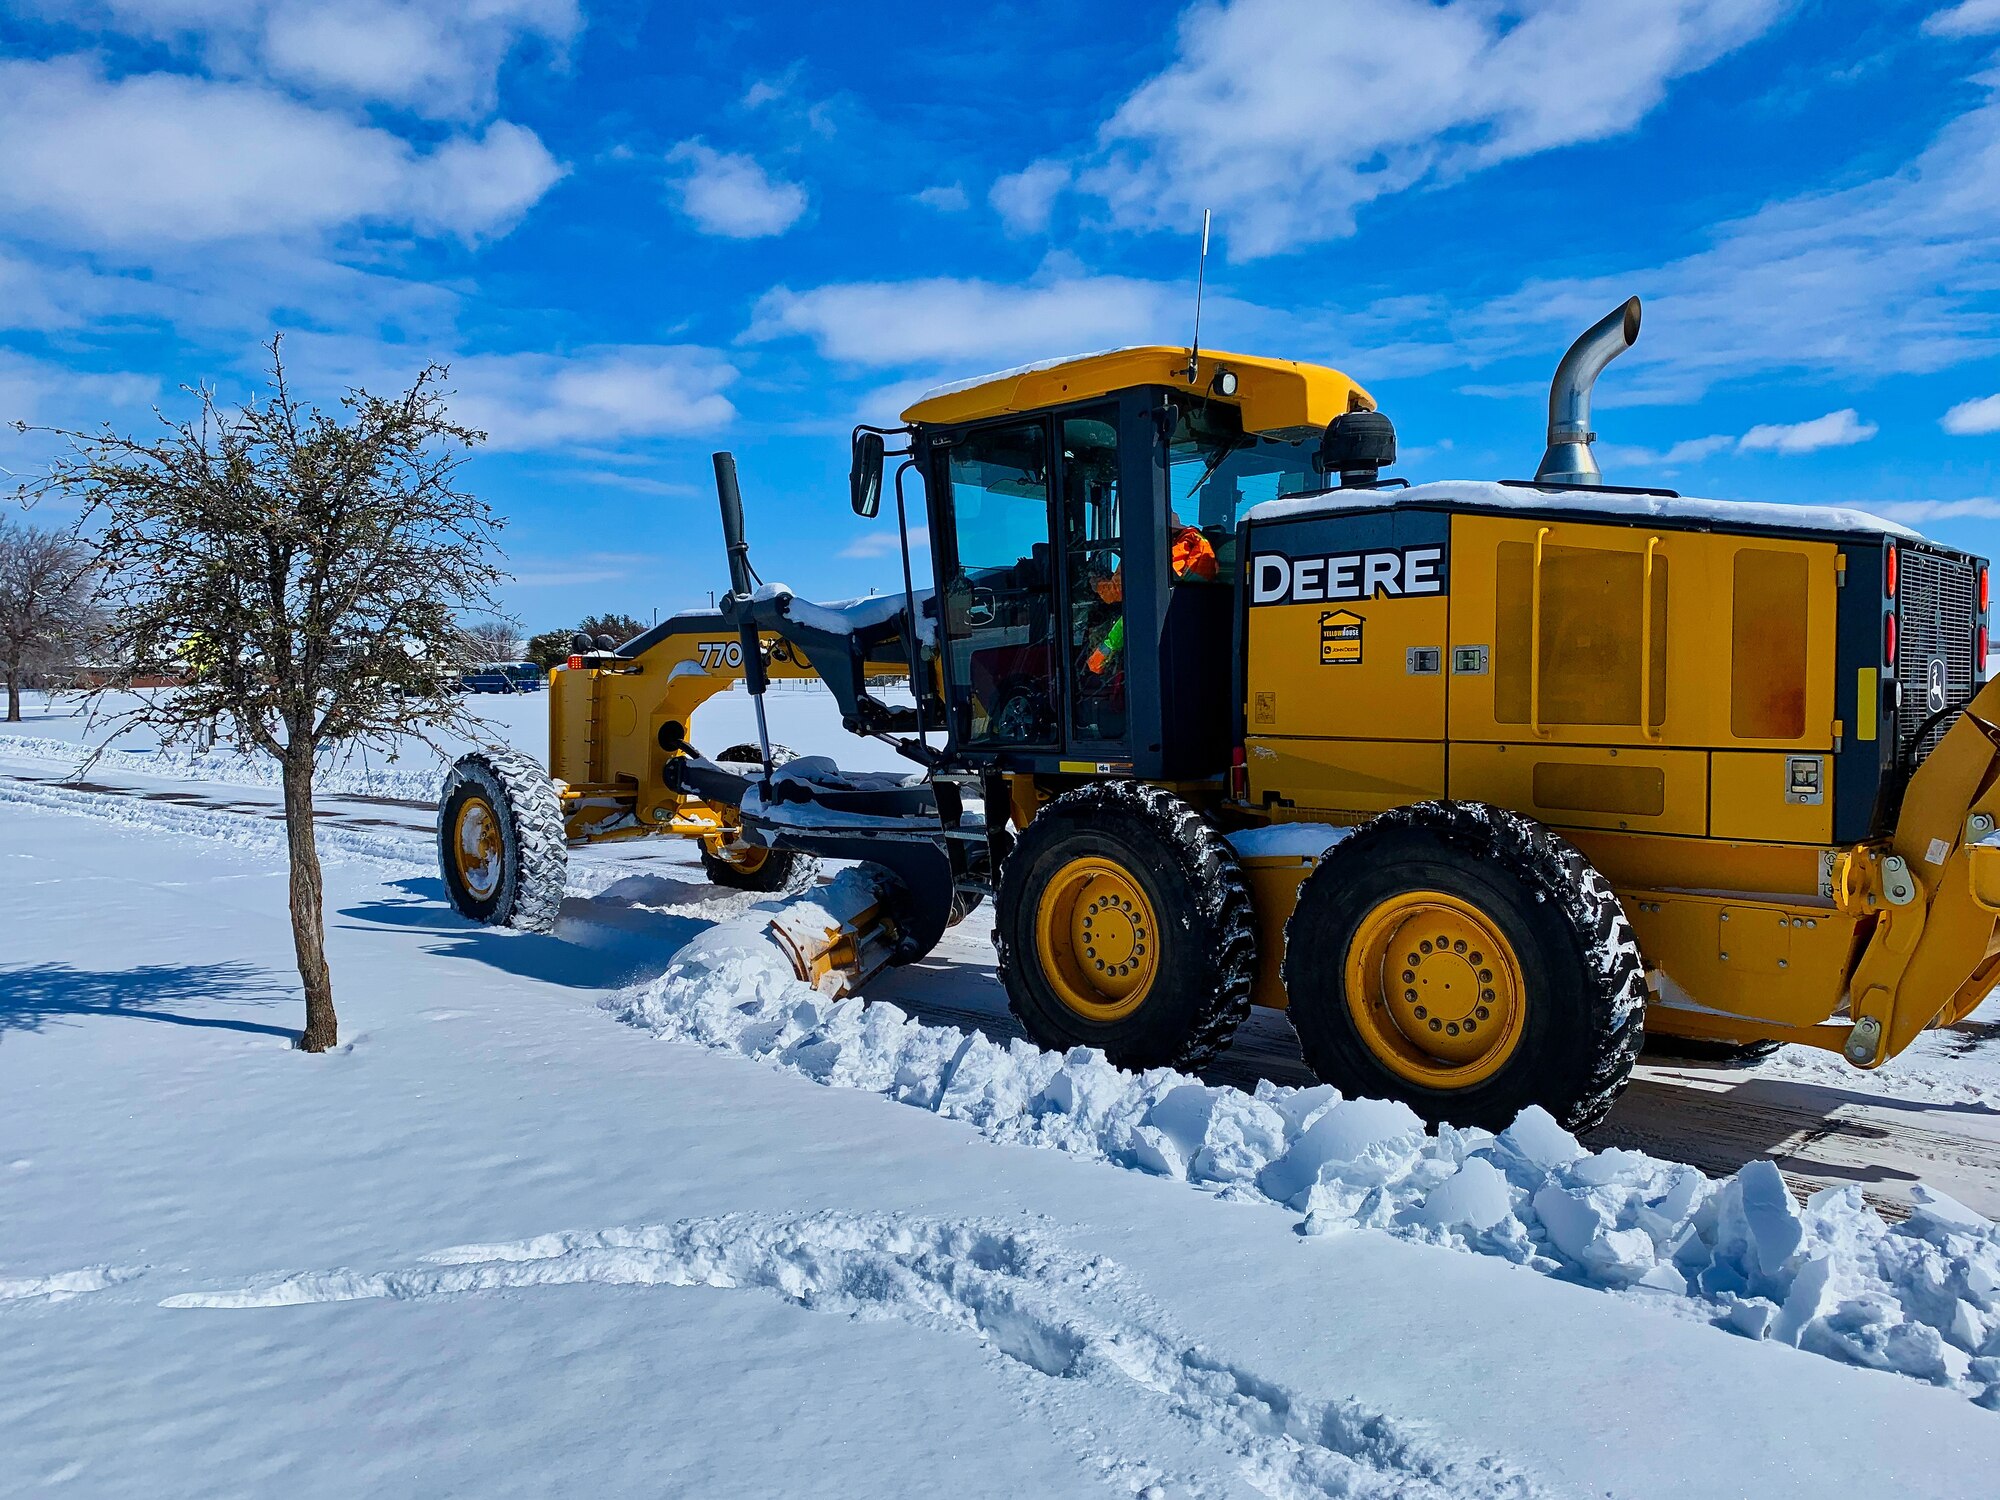 A member of the 17th Civil Engineering Squadron enhances the safety of the travel routes throughout the base by clearing snow on Goodfellow Air Force Base, Texas, Feb. 15, 2021. The 17th CES adapted and overcame the challenges of record-breaking snowfall with no proper removal equipment in order to continue the mission. (Courtesy photo)